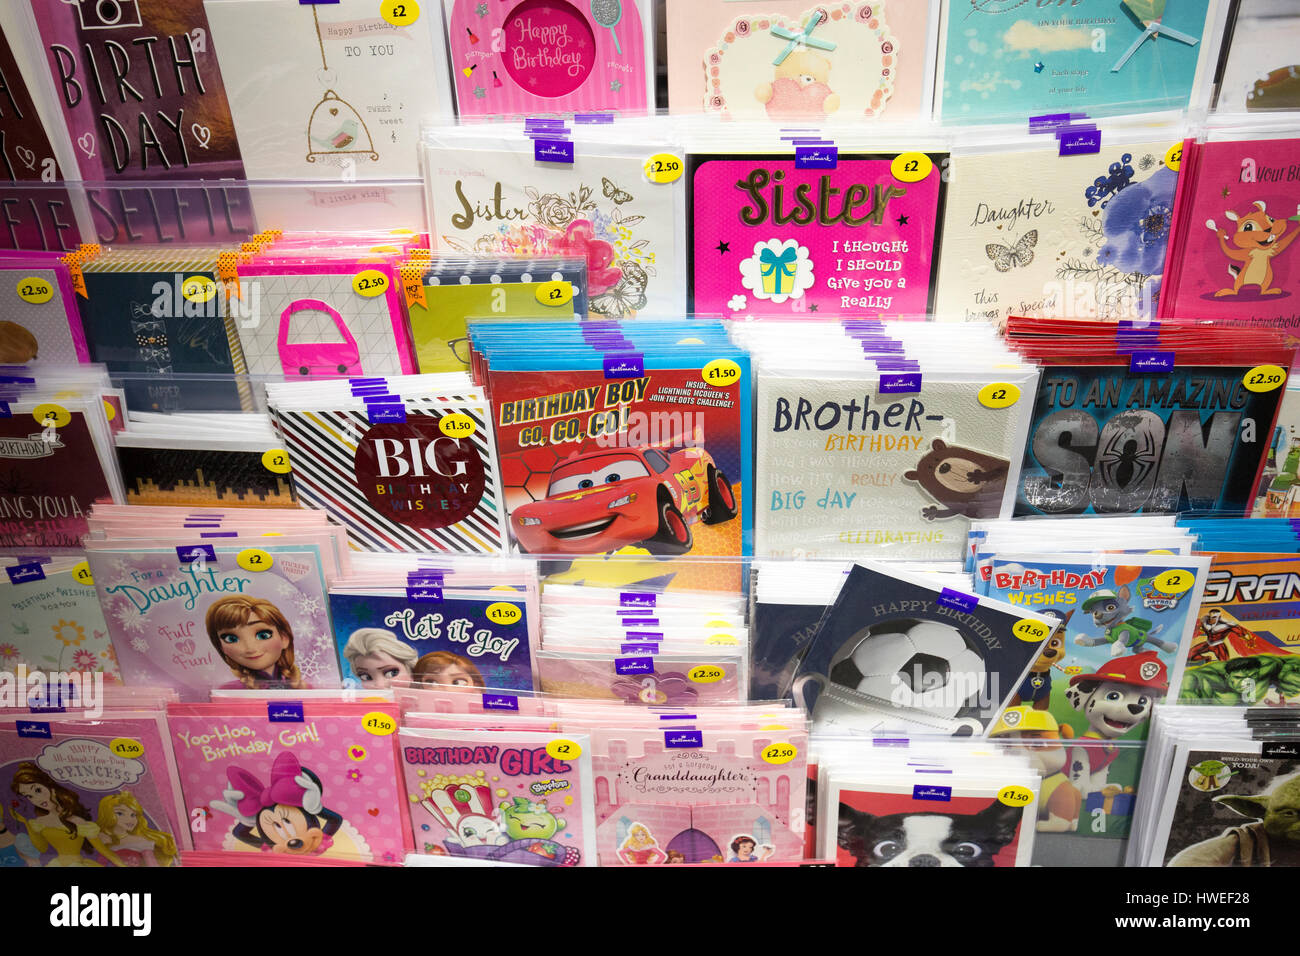 Greetings cards on sale in a Morrisons supermarket Stock Photo